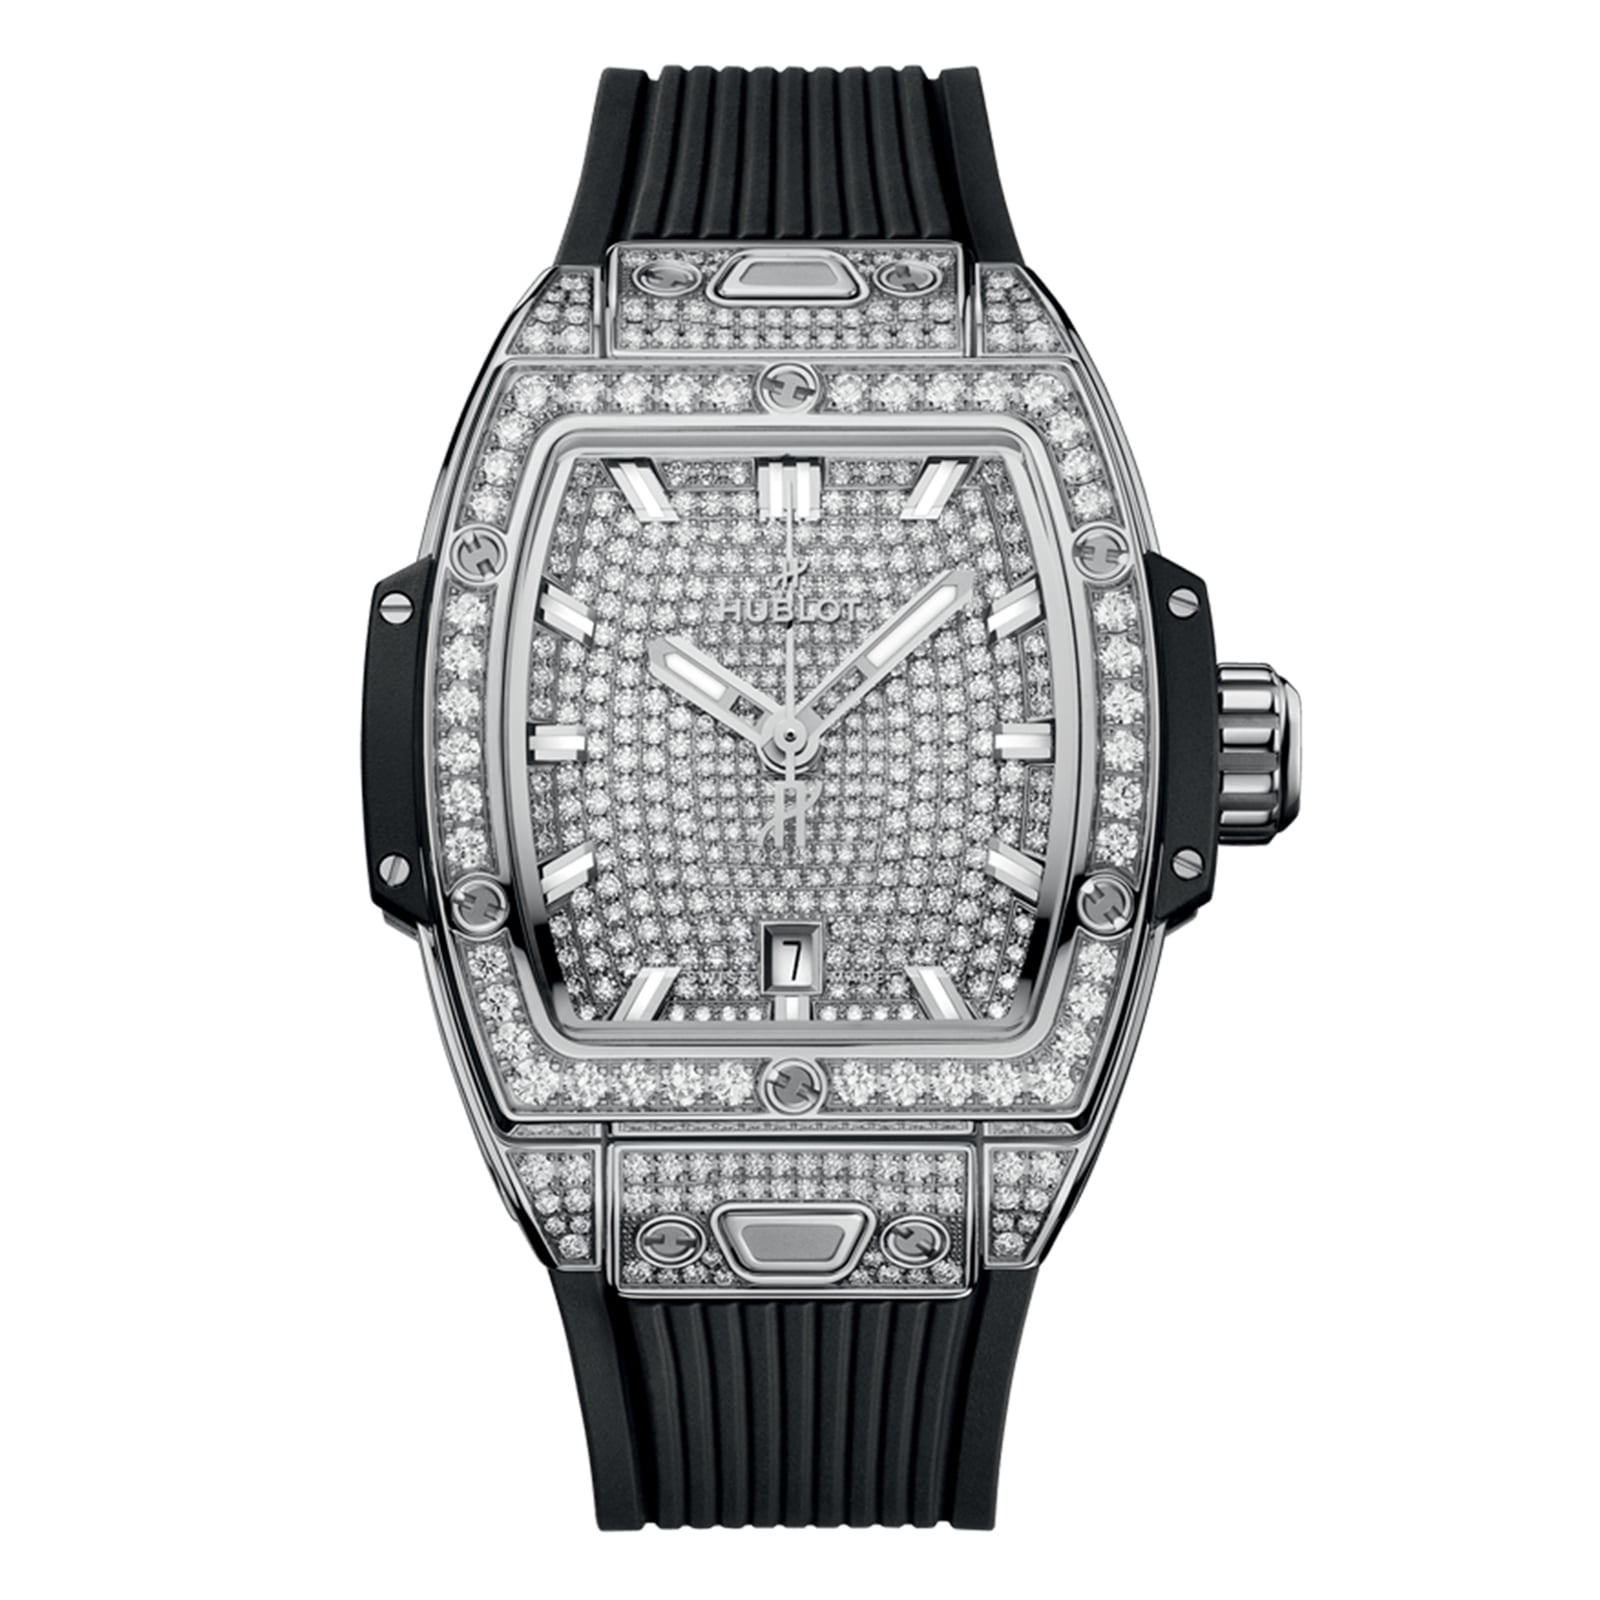 Hublot Big Bang Rose Gold With Pave Diamond 41mm Mens Watch  341.PX.1223.PX.2704 - Your Watch LLC